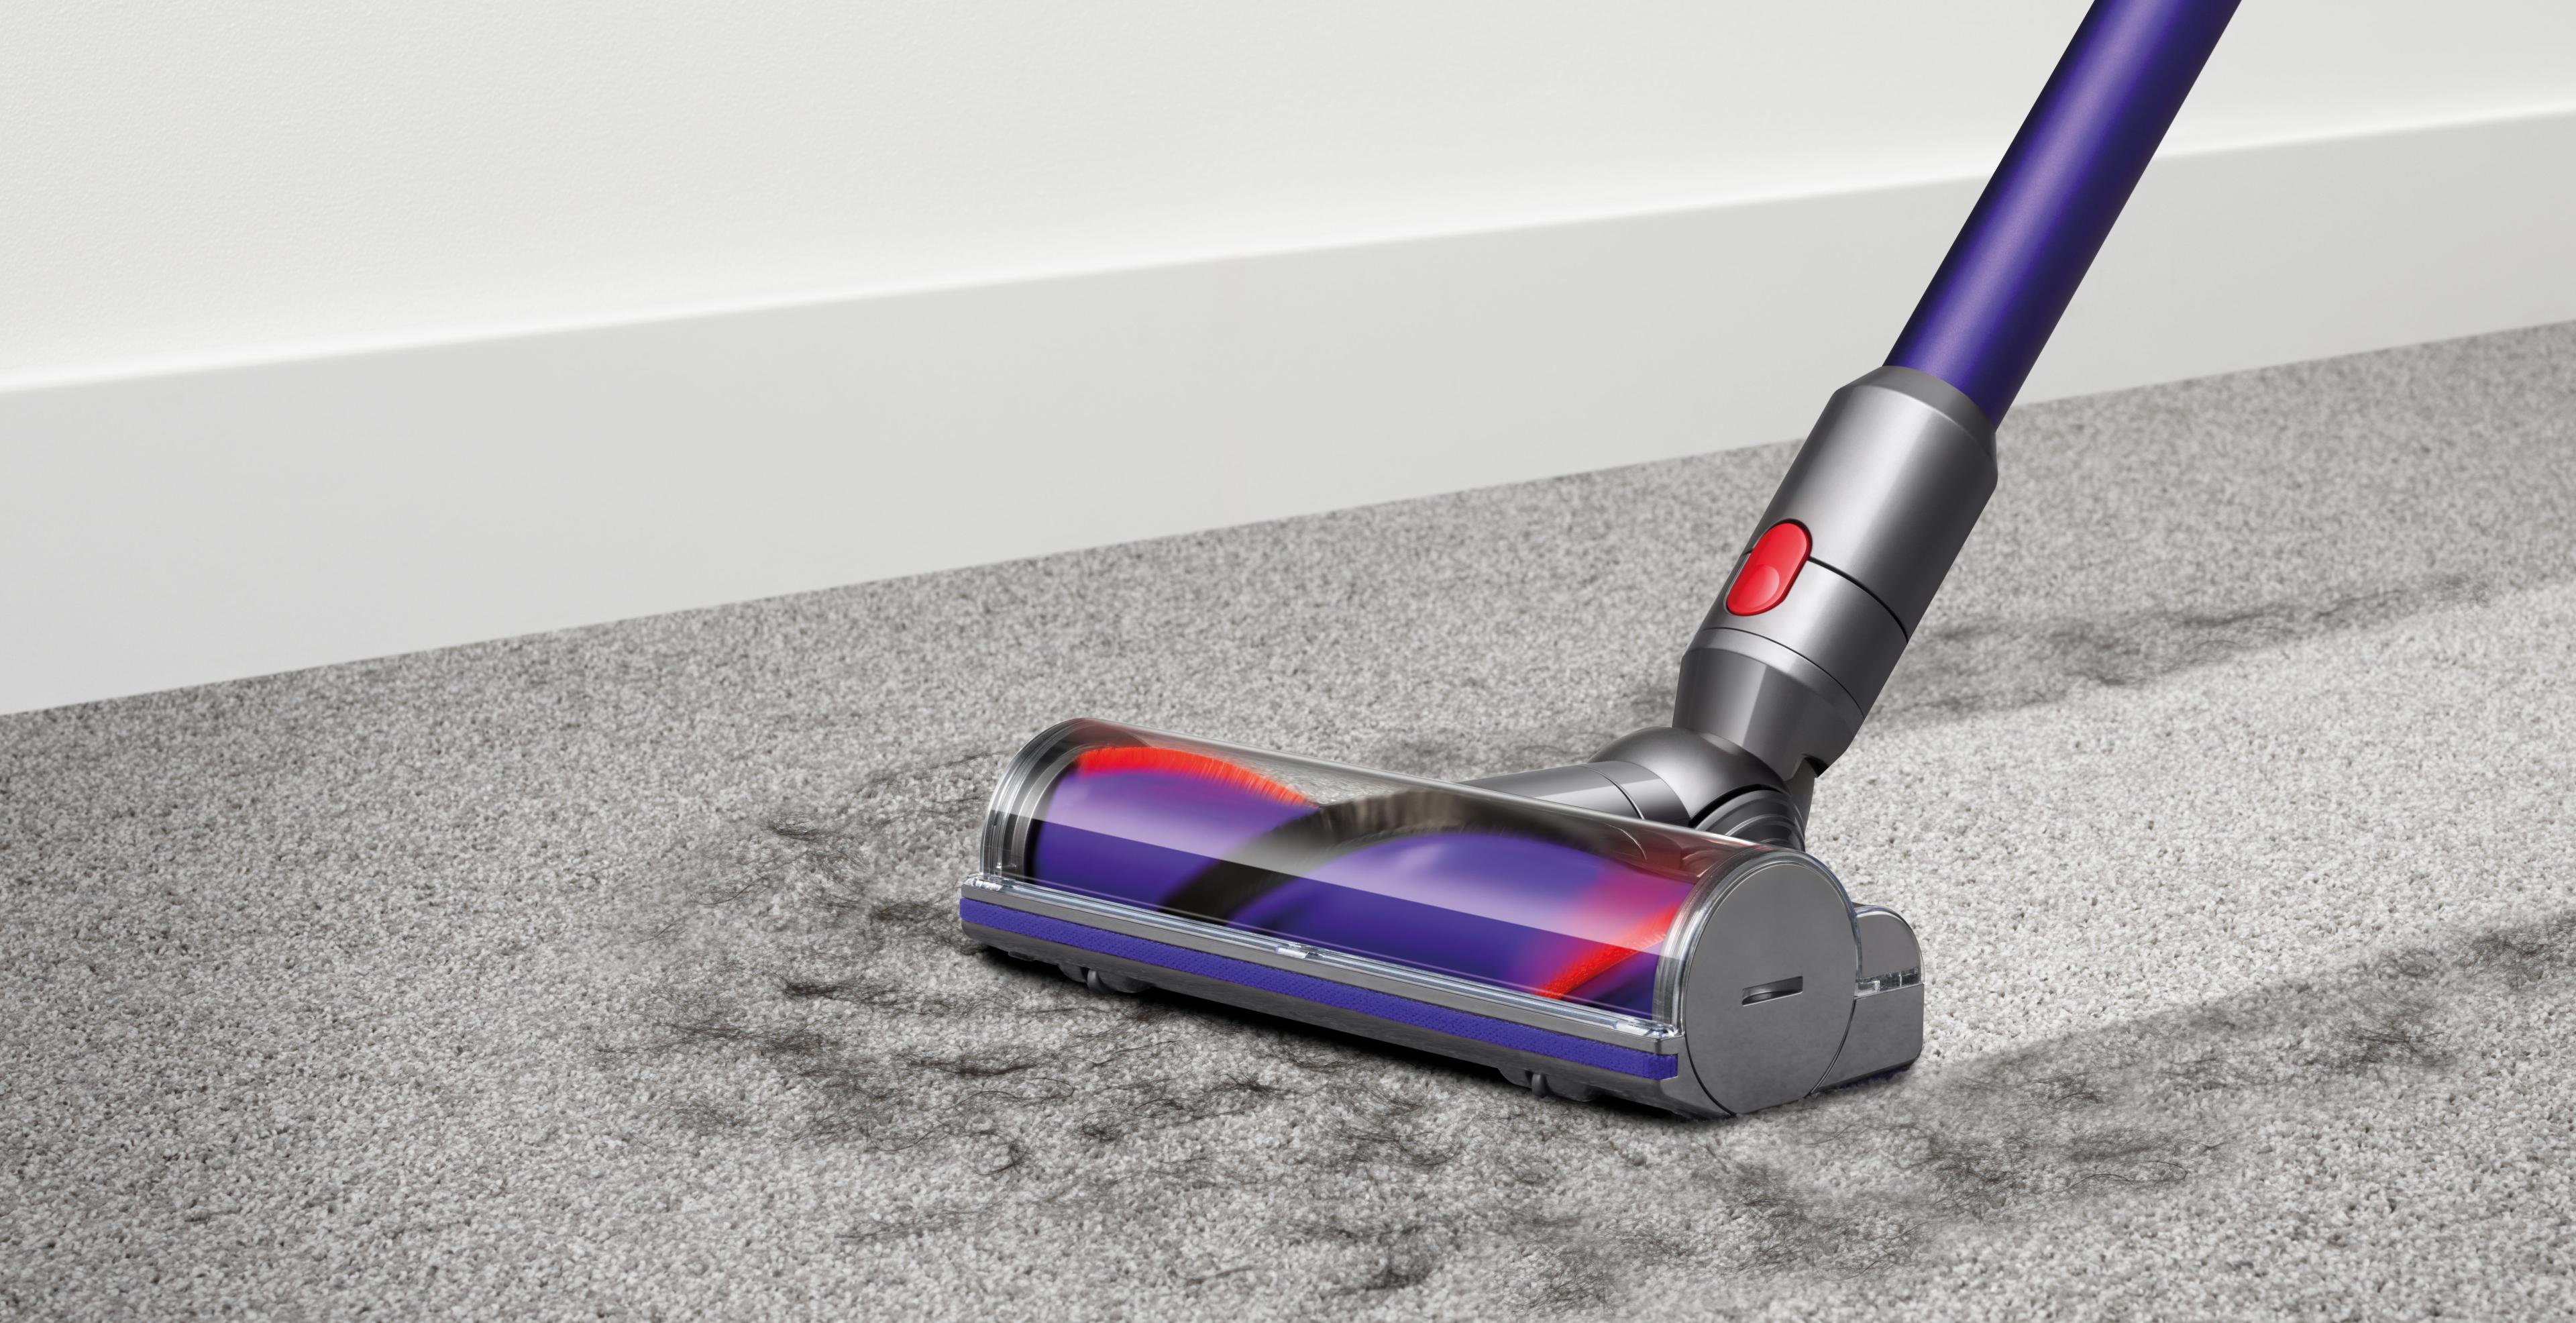  Dyson Cyclone V10 Animal Direct drive cleaner head